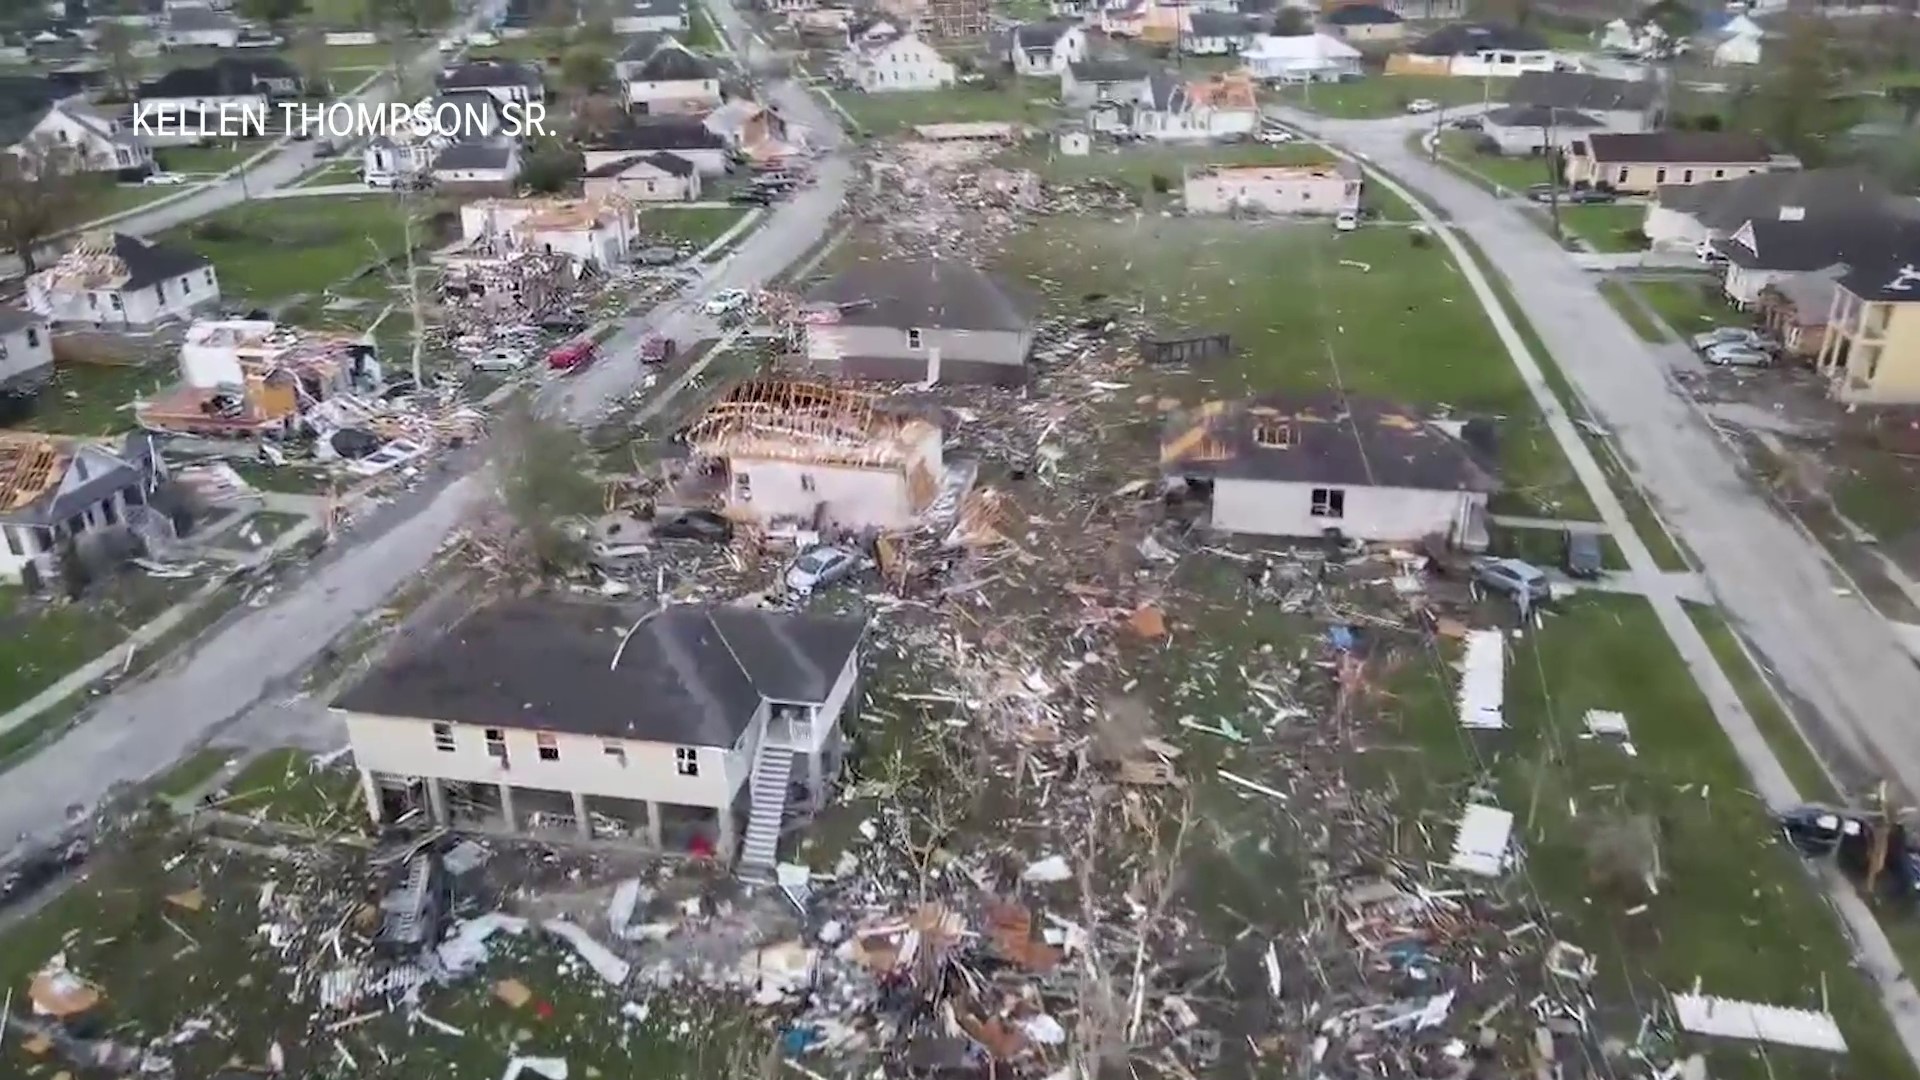 The drone video shows what is a typical tornado hopscotching pattern with some homes being completely gone, some with holes in rooftops and some homes passed by.